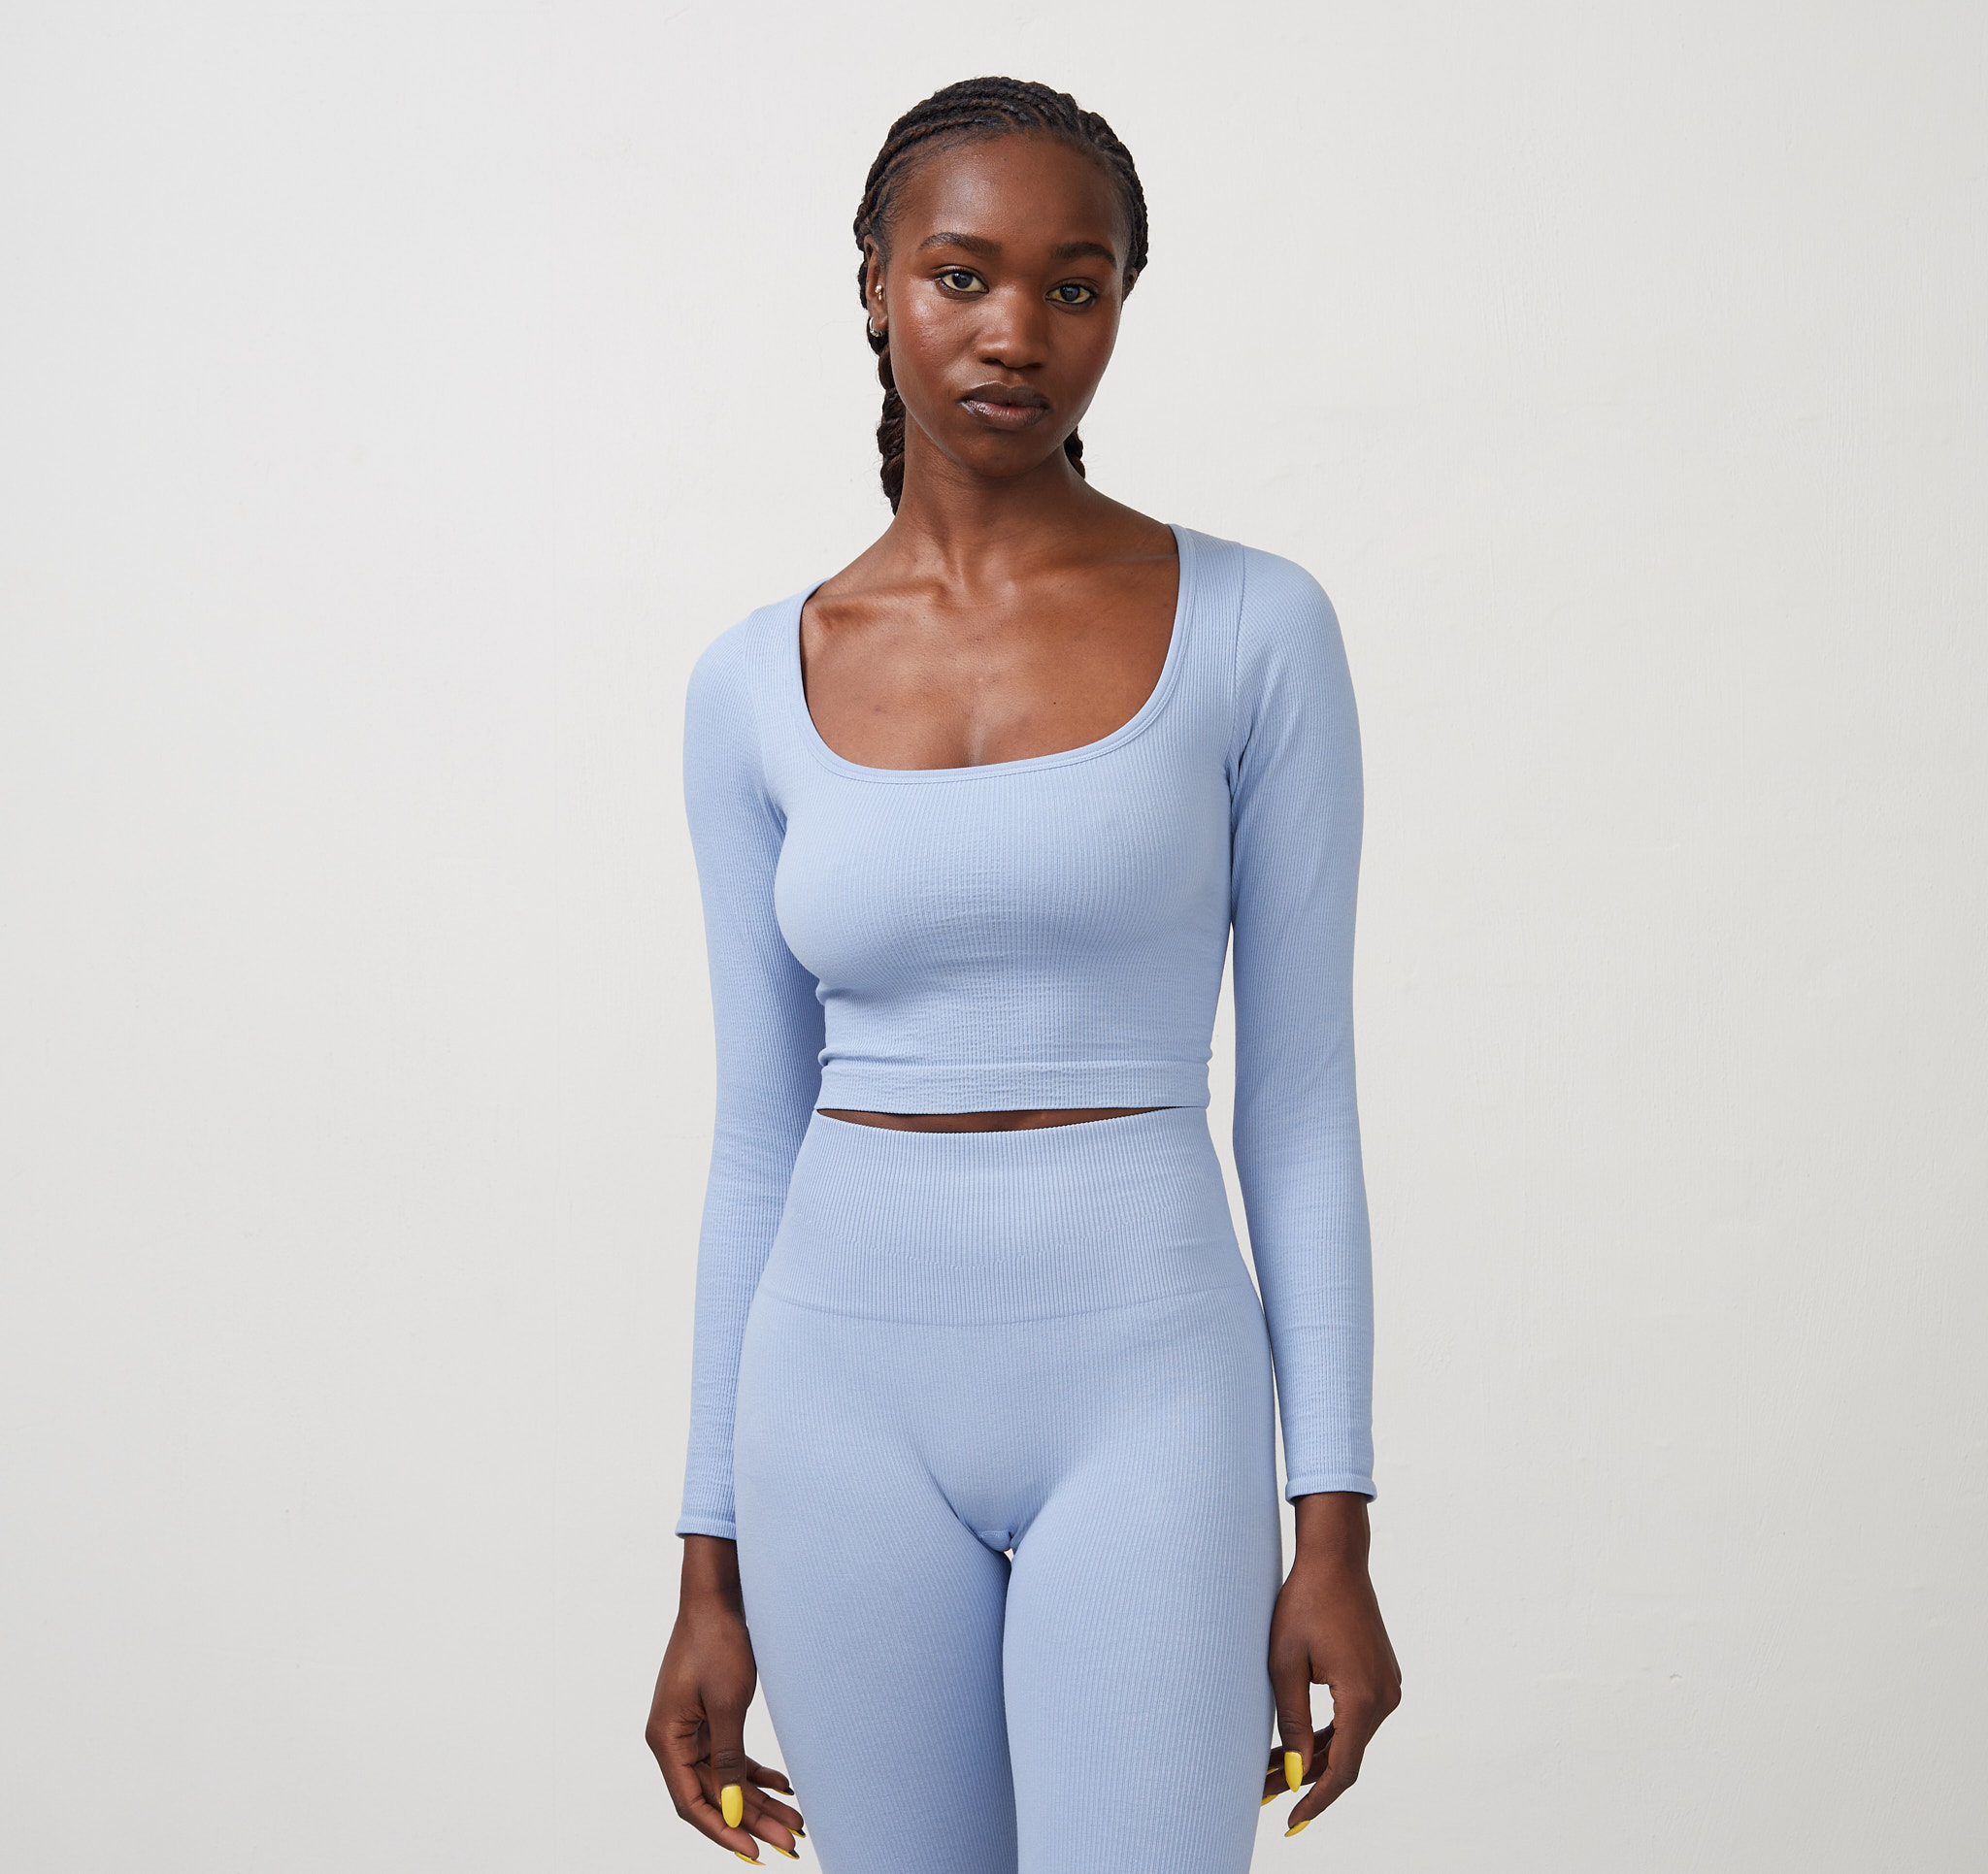 Buy Organic Cotton Seamless Long-Sleeve Crop Top, Fast Delivery